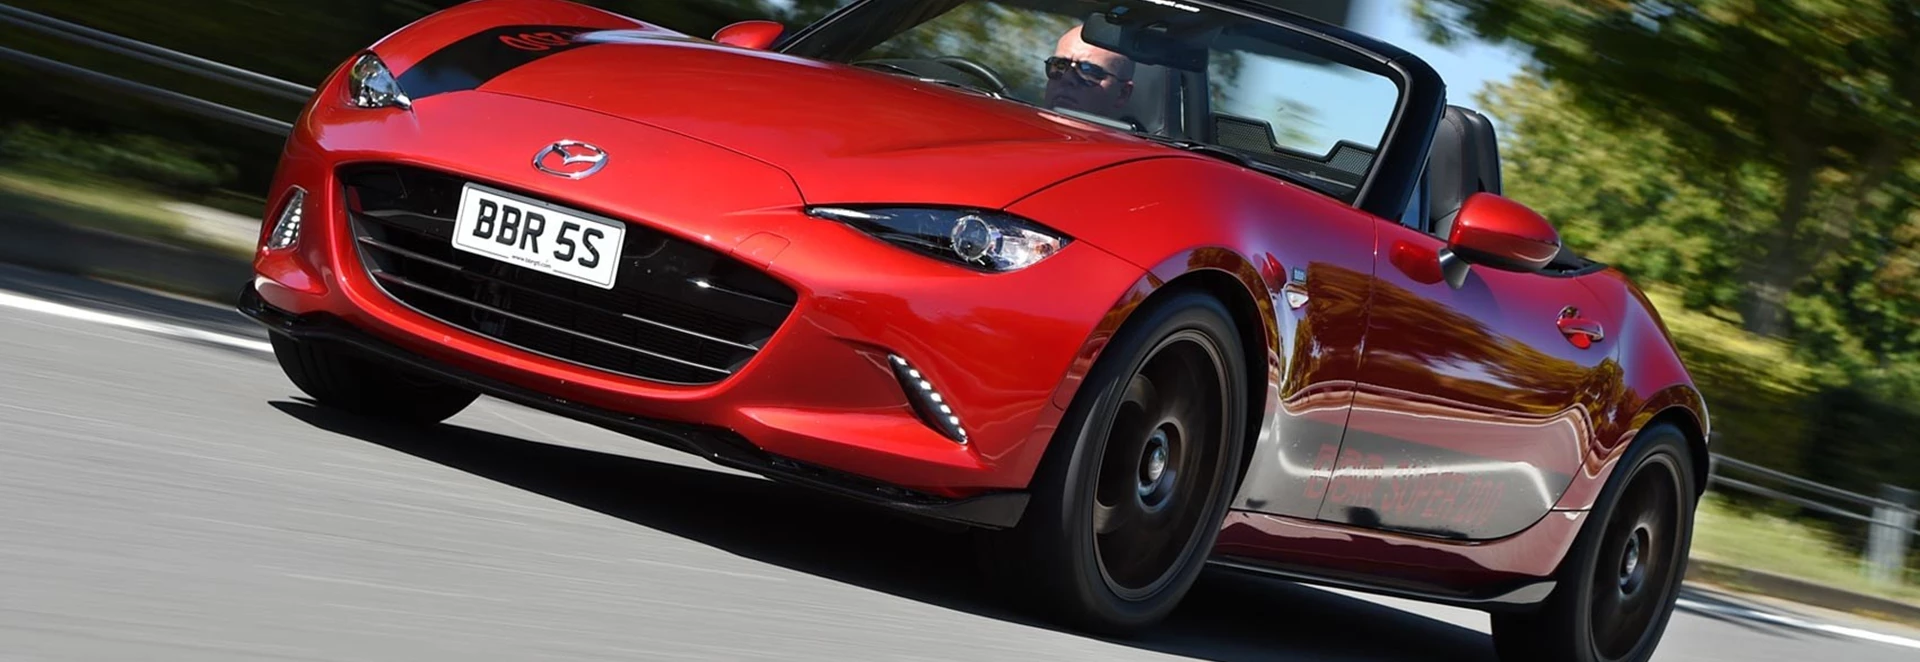 Mazda tuner BBR’s turbo mod will take your MX-5 all the way to 155mph